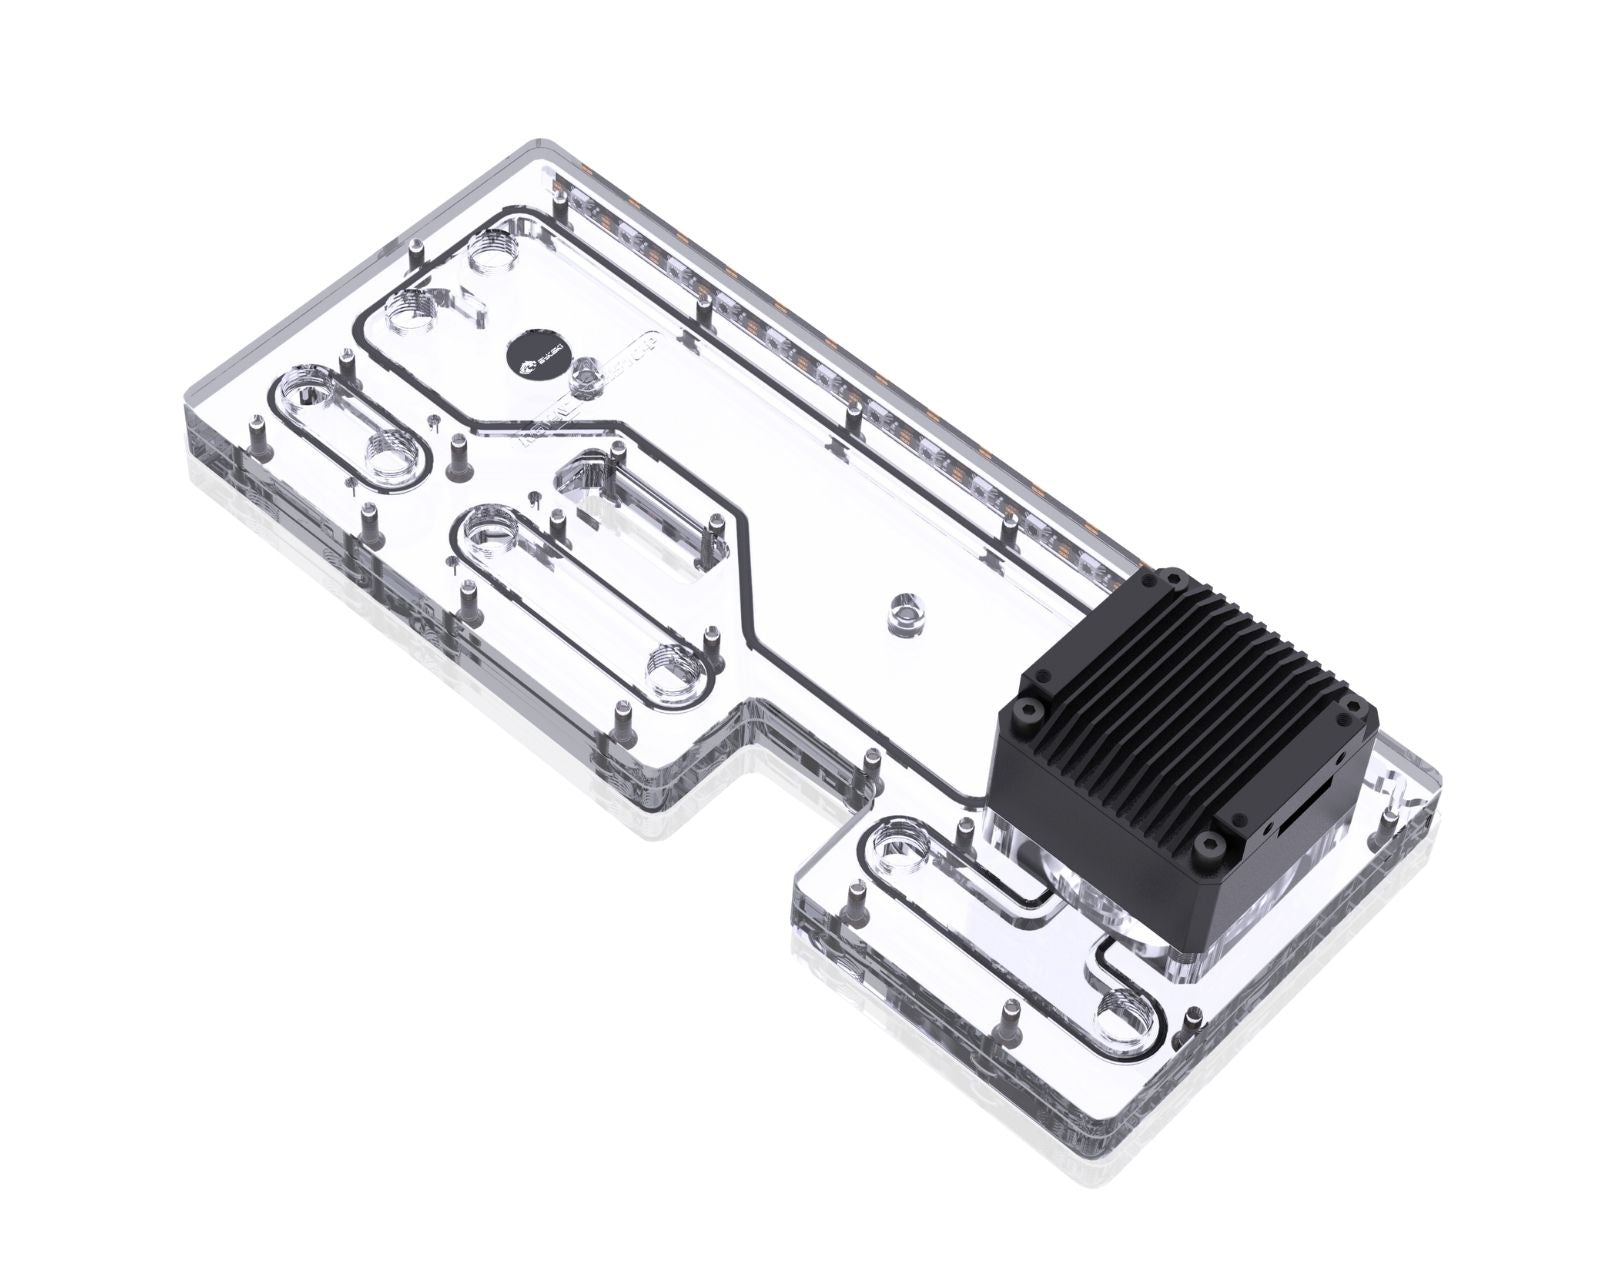 Bykski Distro Plate For NZXT H510 - PMMA w/ 5v Addressable RGB(RBW) (RGV-NZXT-H510-P-K) - DDC Pump With Armor